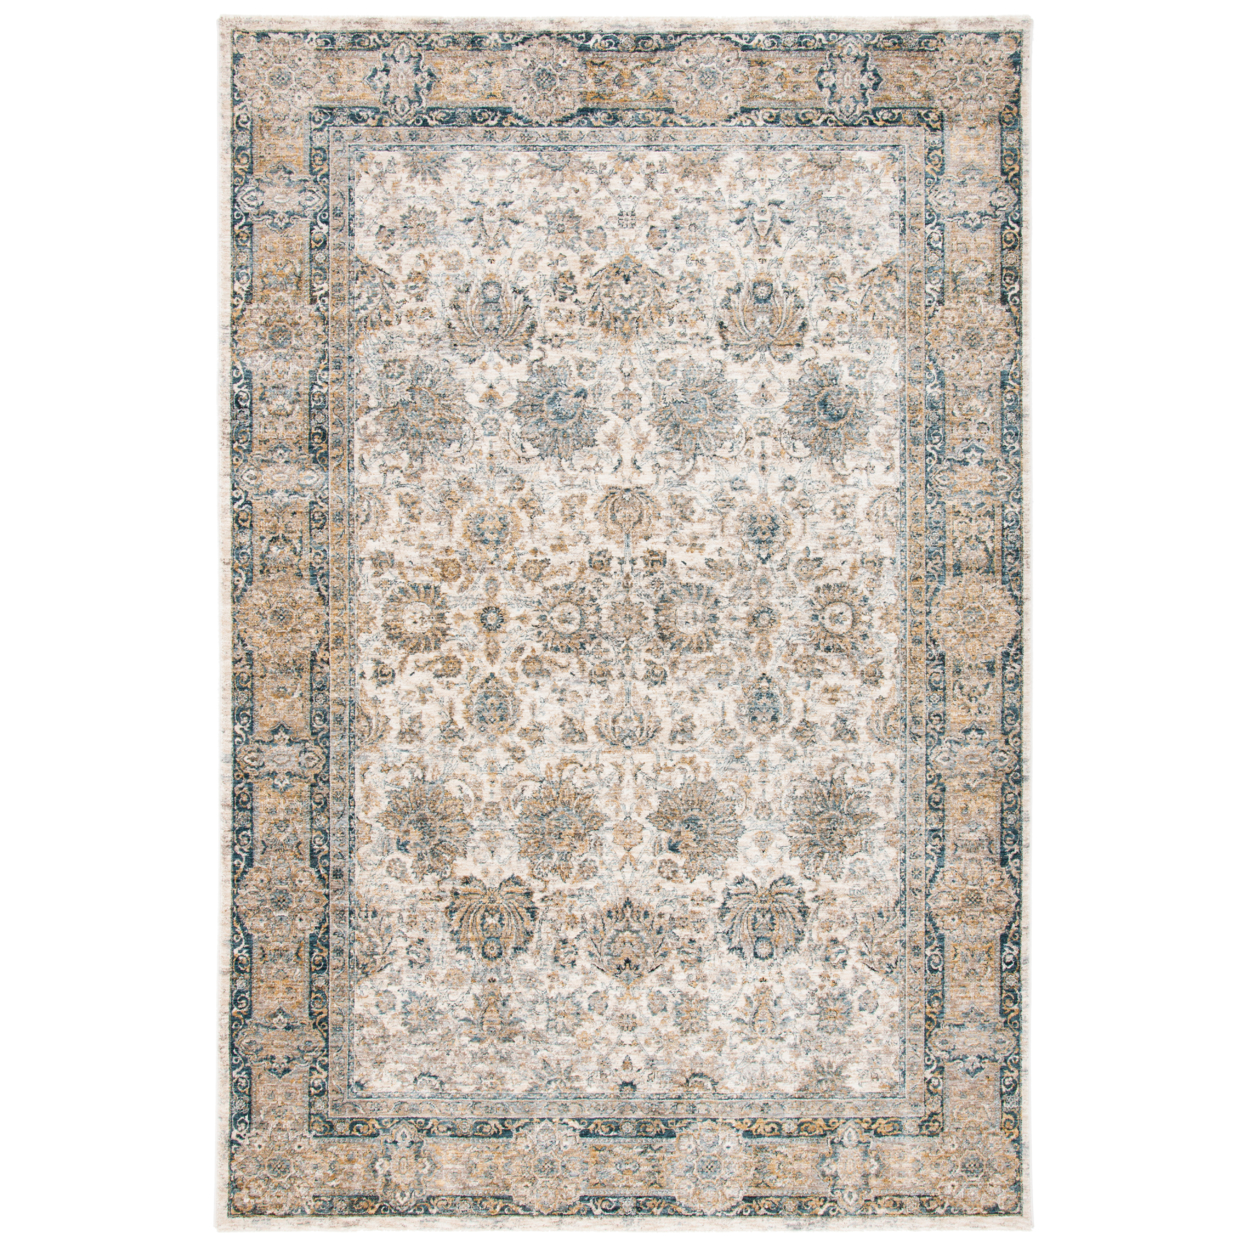 SAFAVIEH Valencia Collection VAL570A Ivory / Blue Rug - 5' X 8'